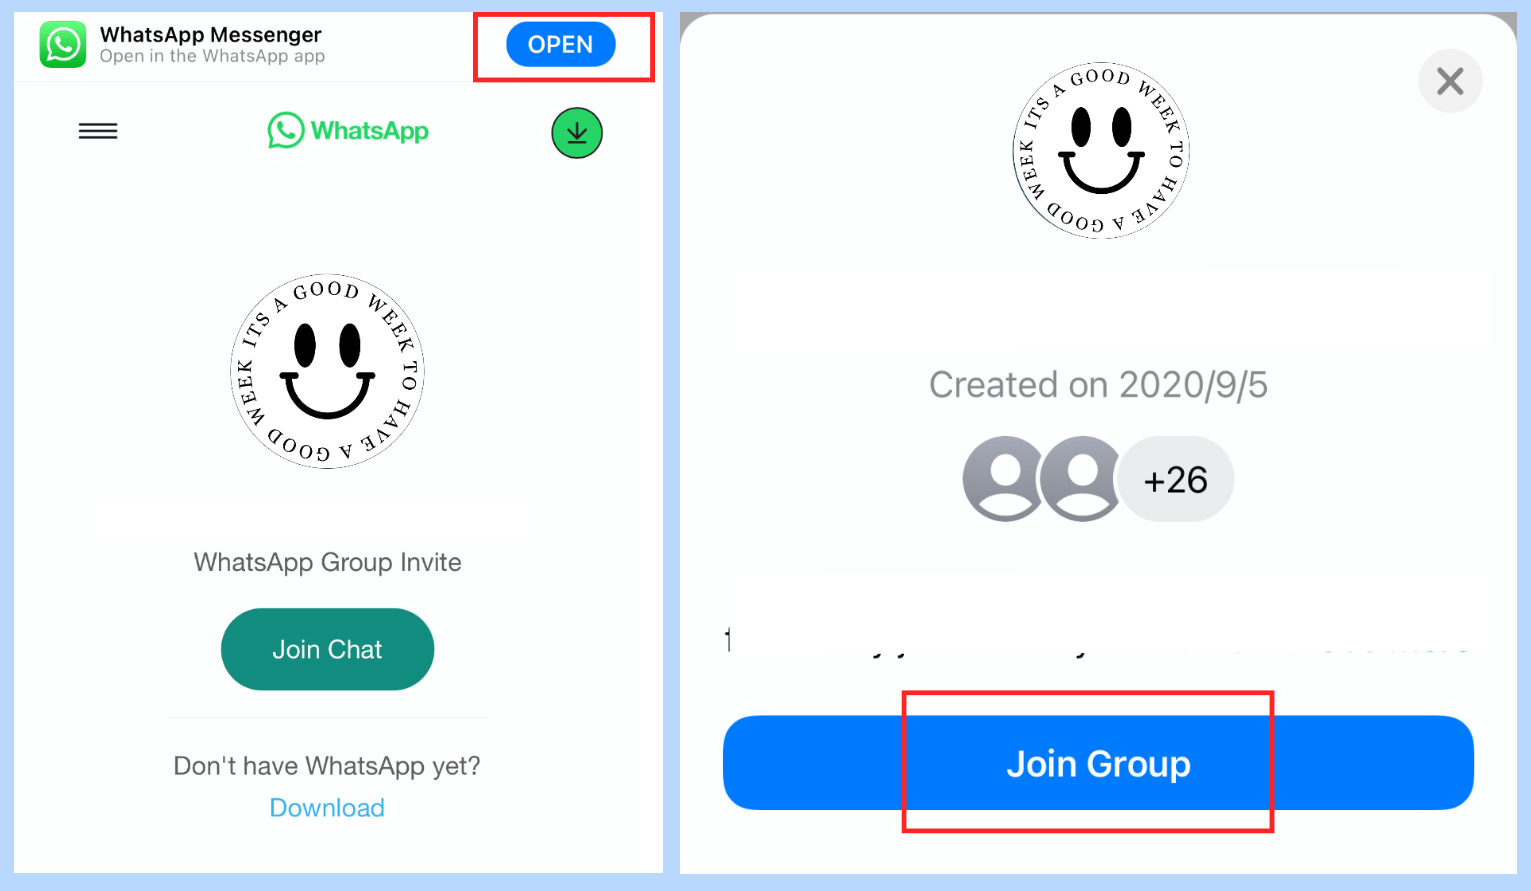 copy group link and join gruop